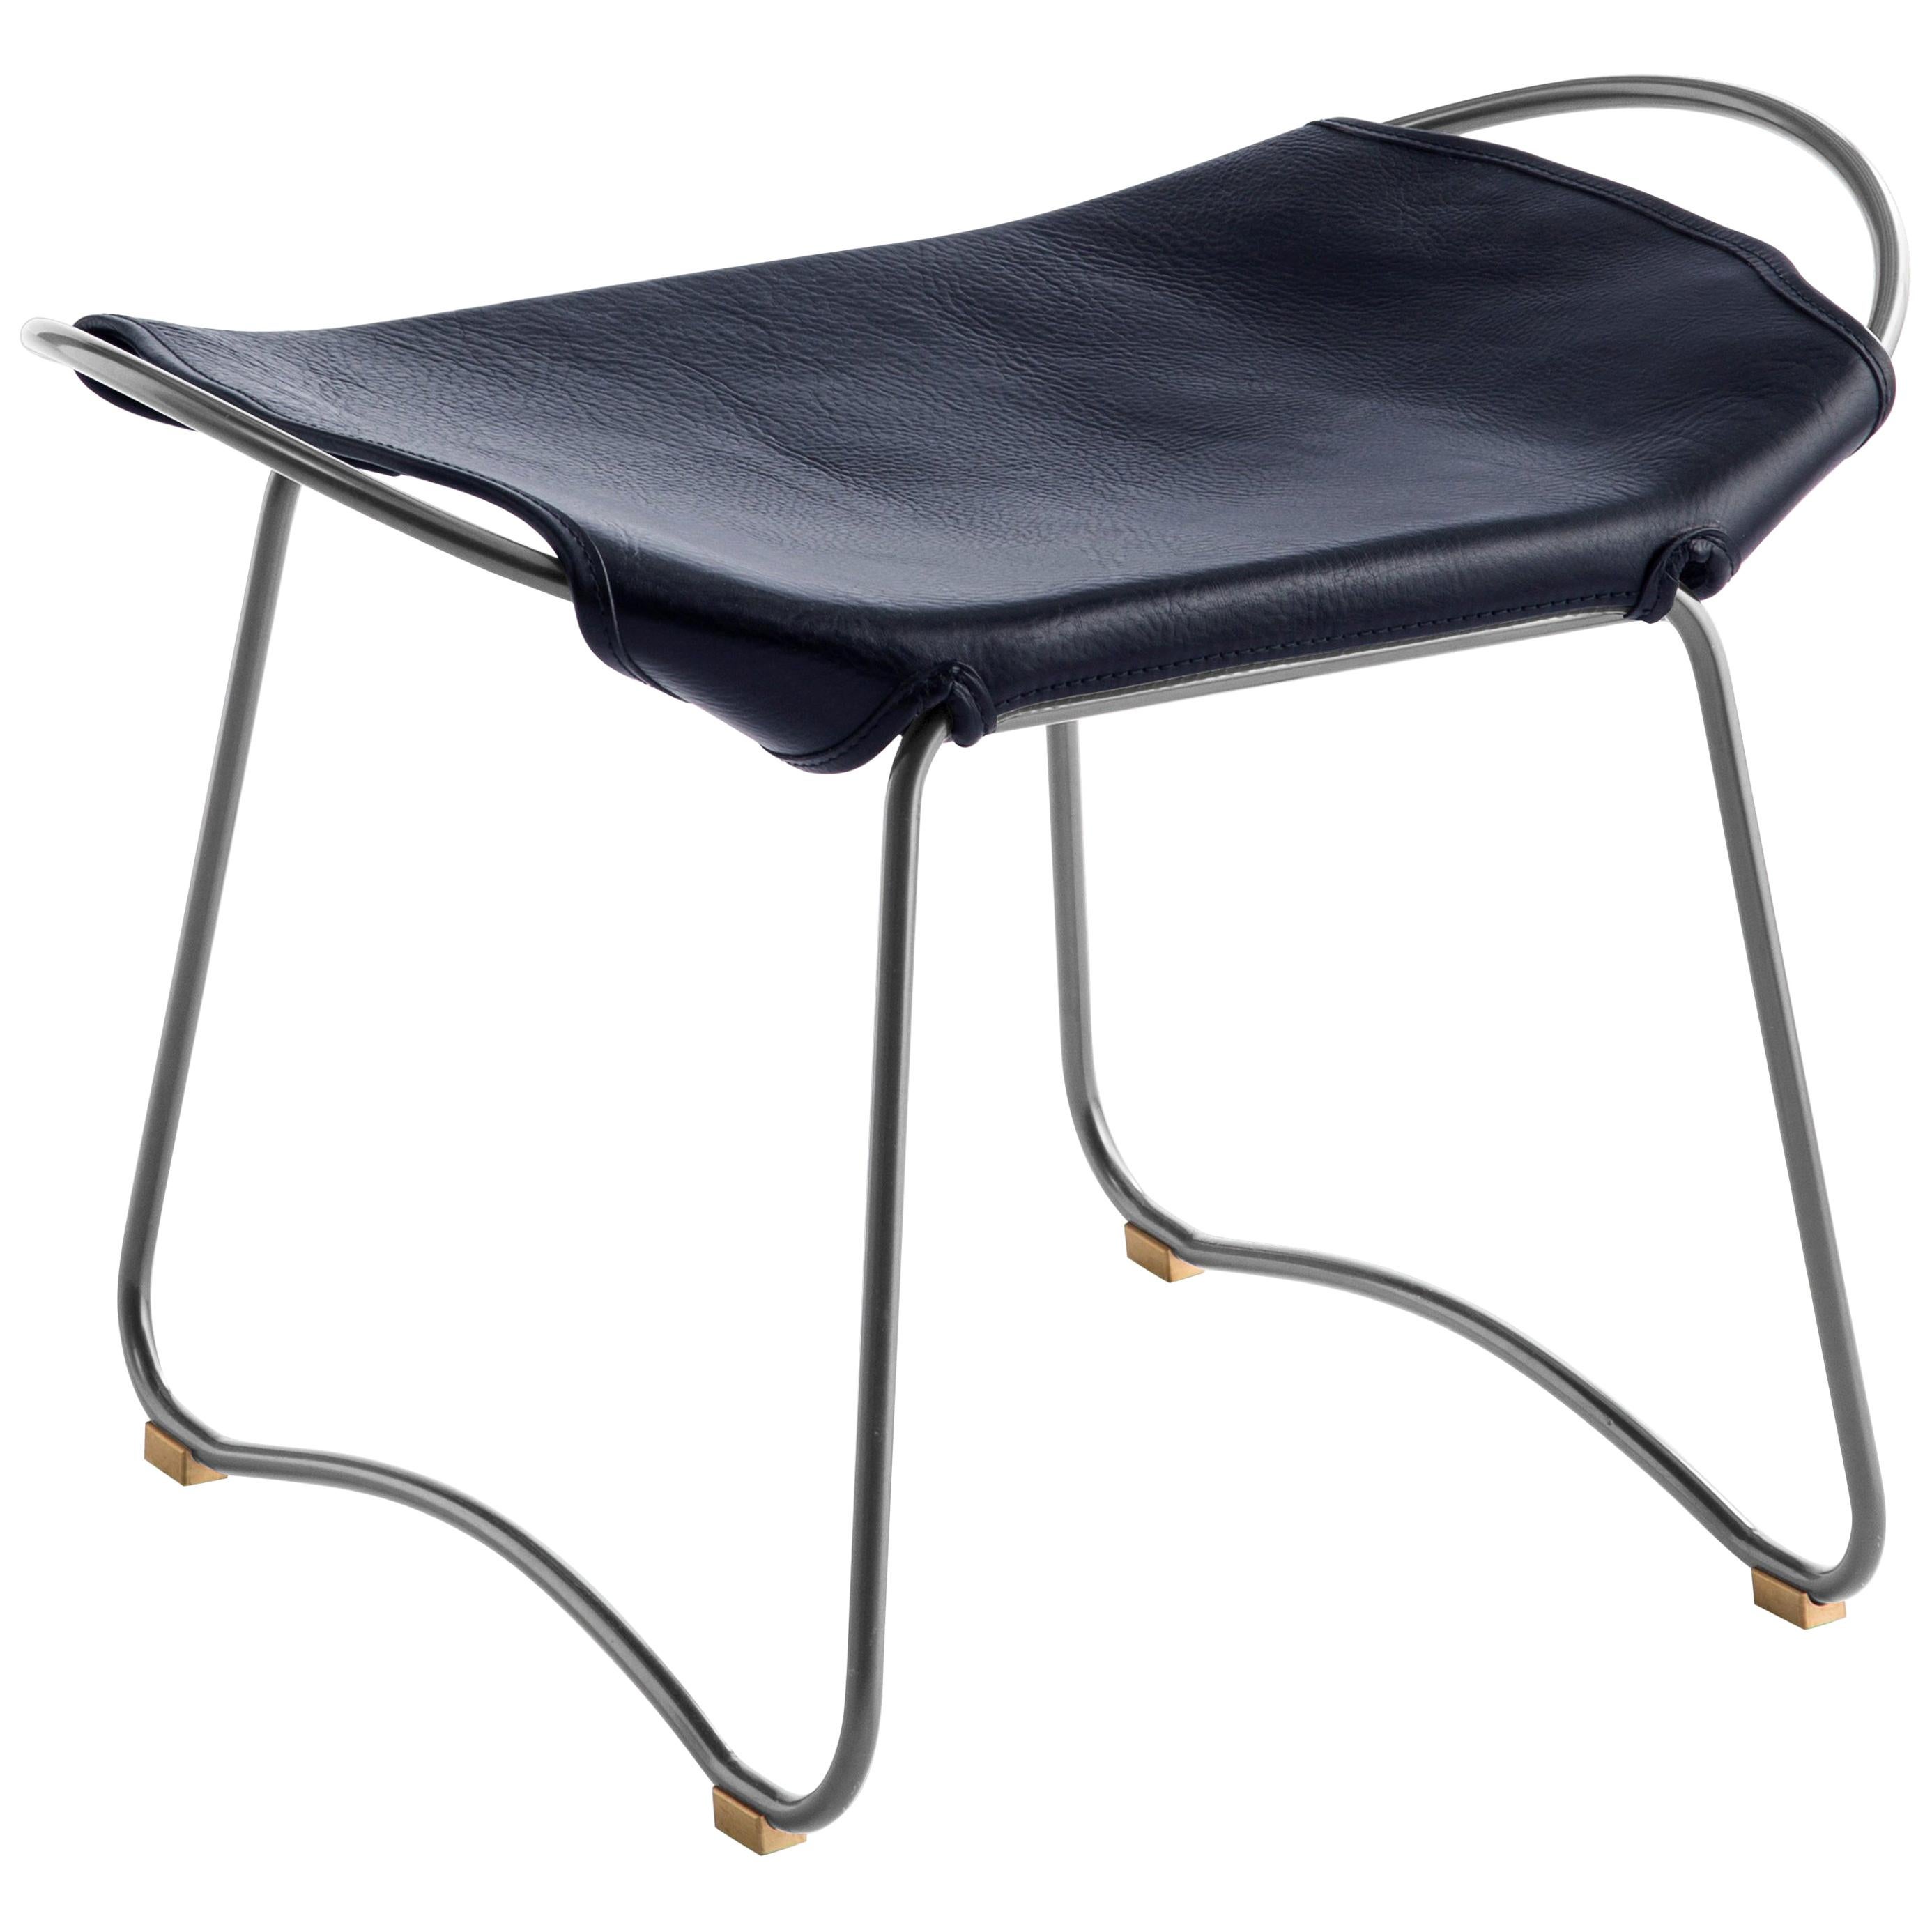 Footstool, Silver Steel and Vegetable Navy Leather, Modern Style 